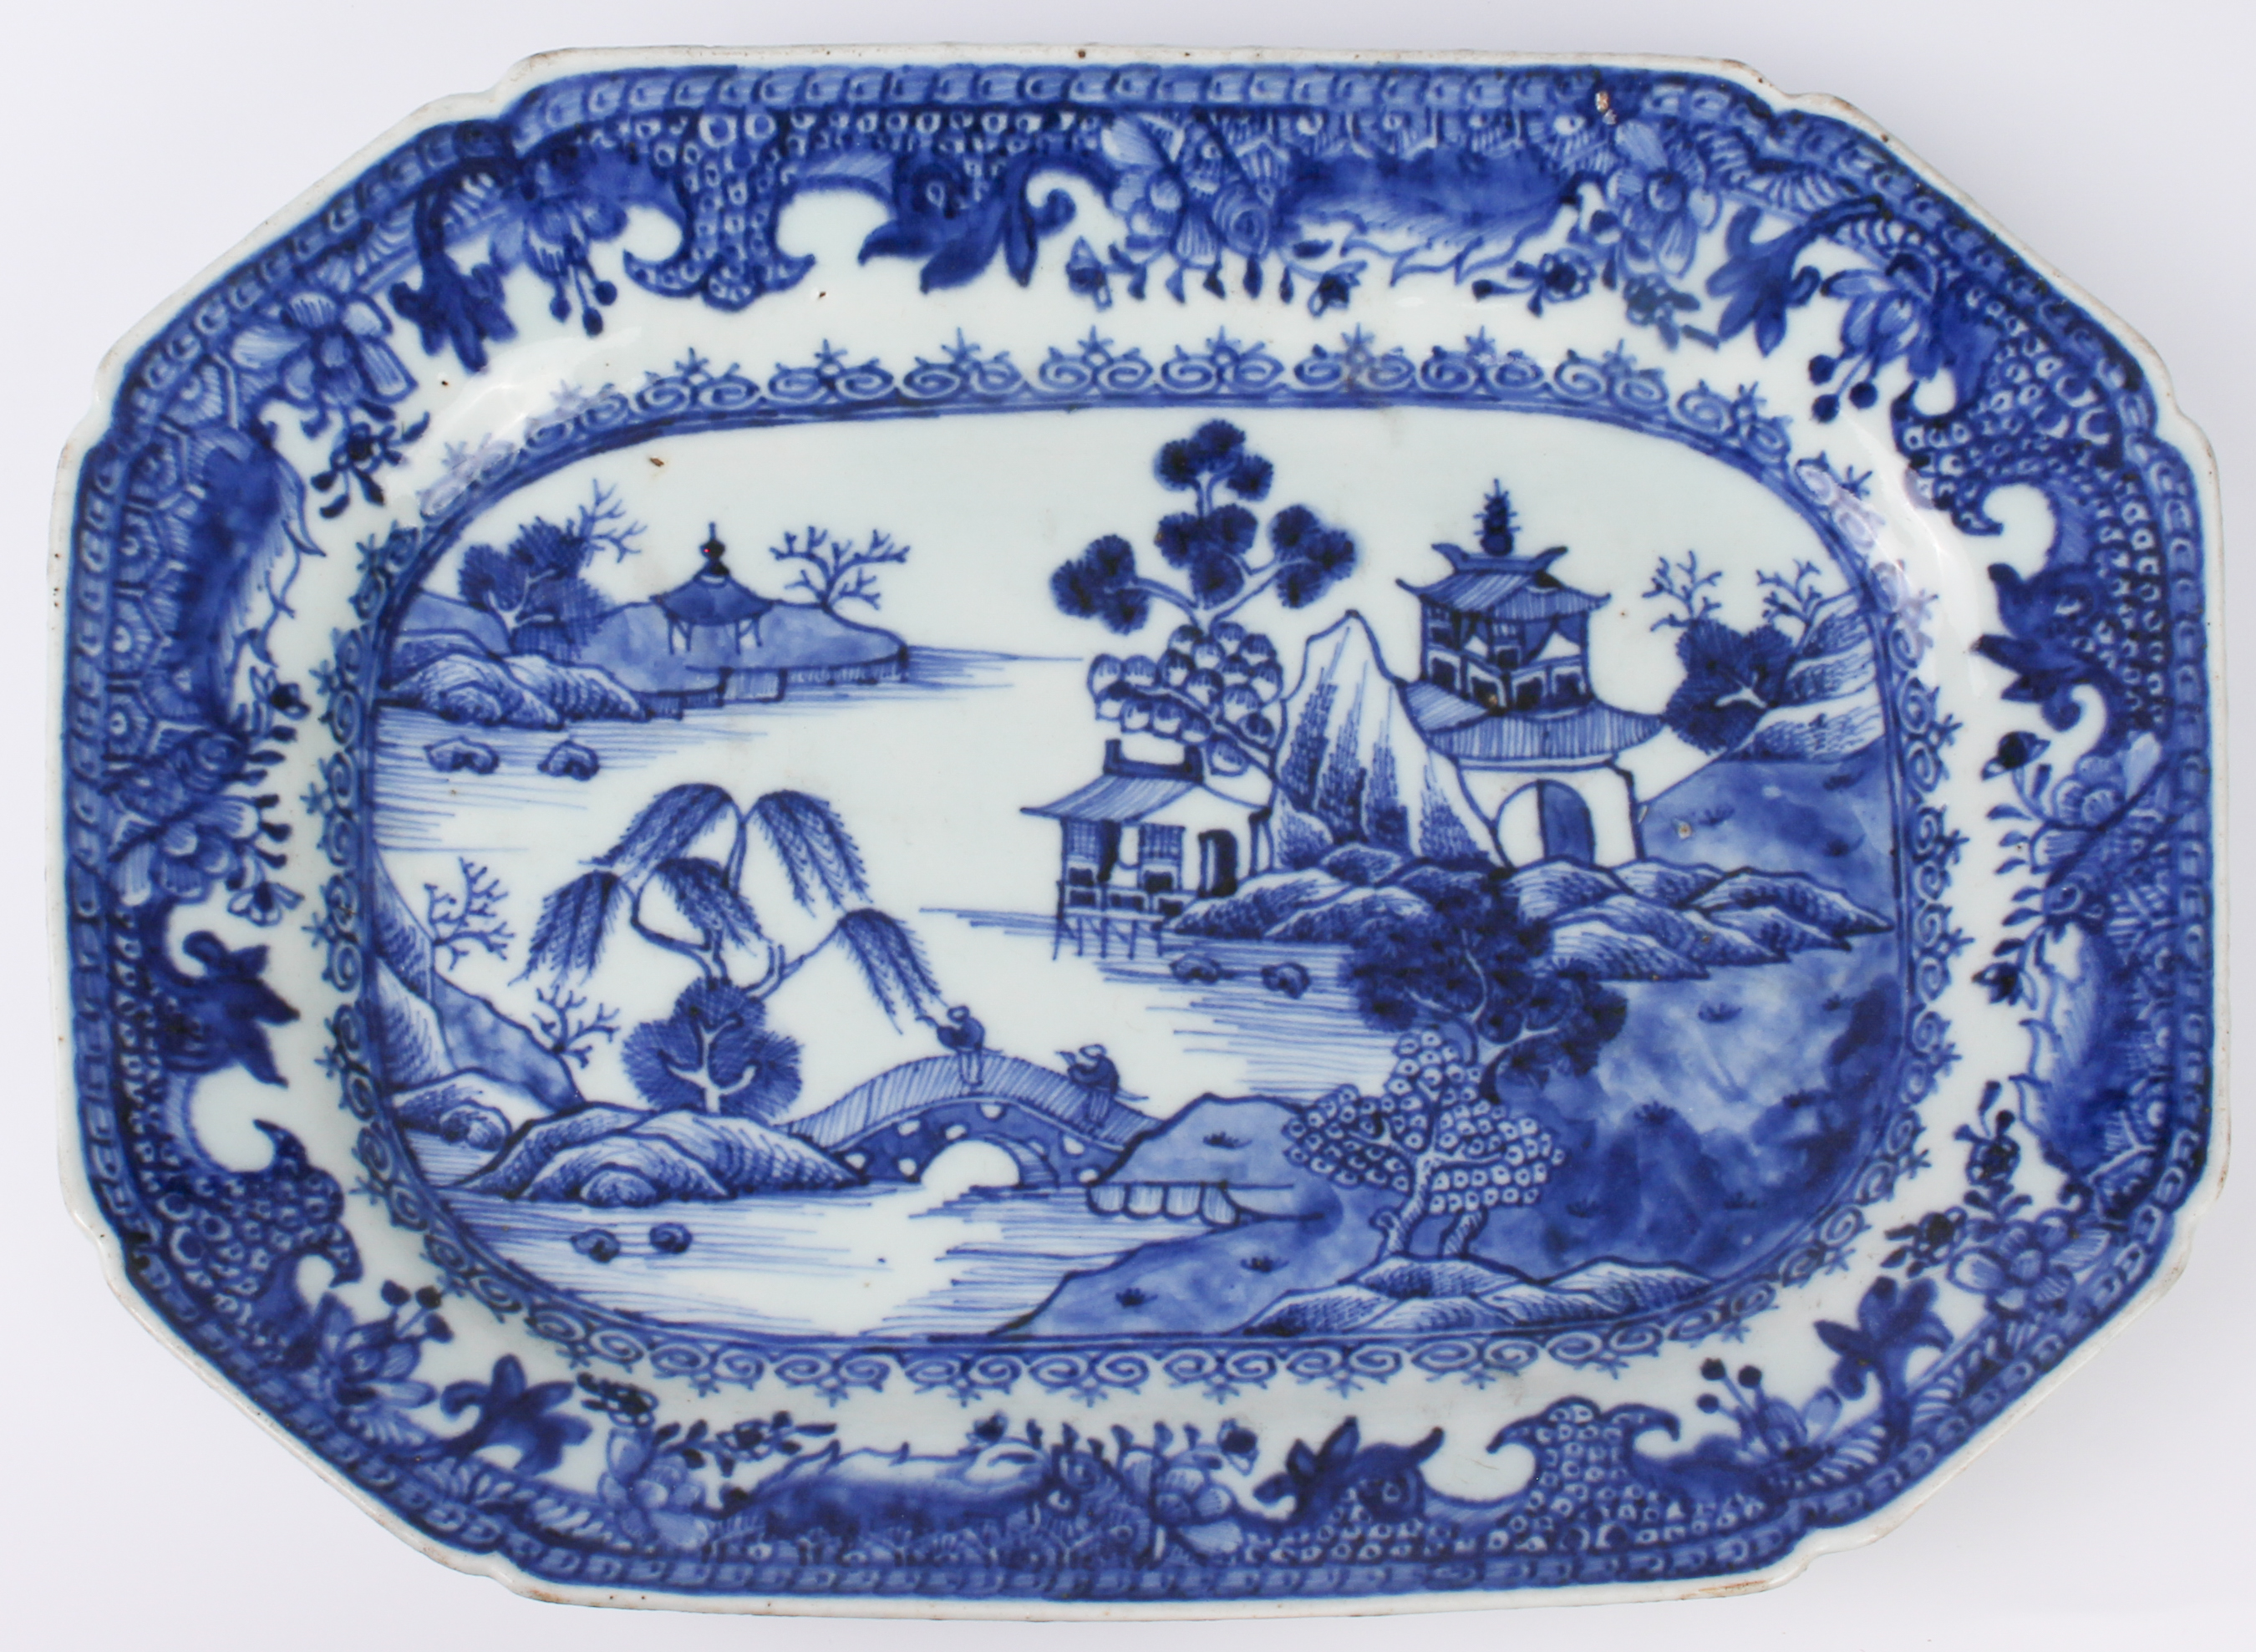 Eight Chinese export porcelain blue and white plates and octagonal platters - late 18th / early 19th - Image 10 of 31